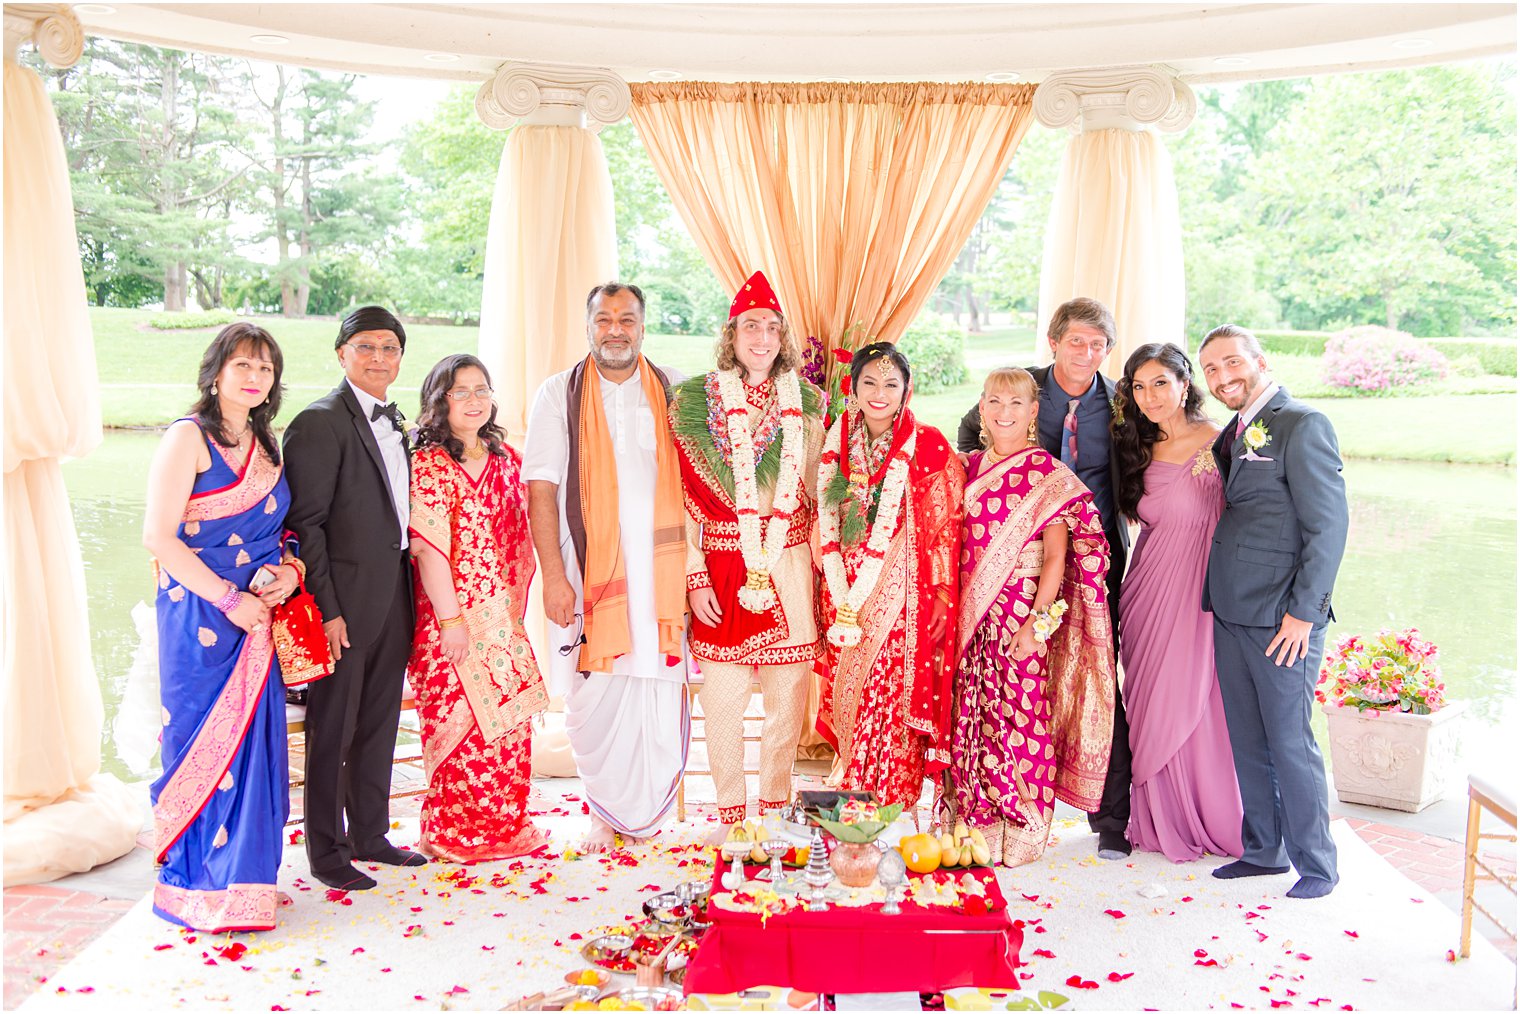 family pose together after traditional Indian wedding at the Ashford Estate